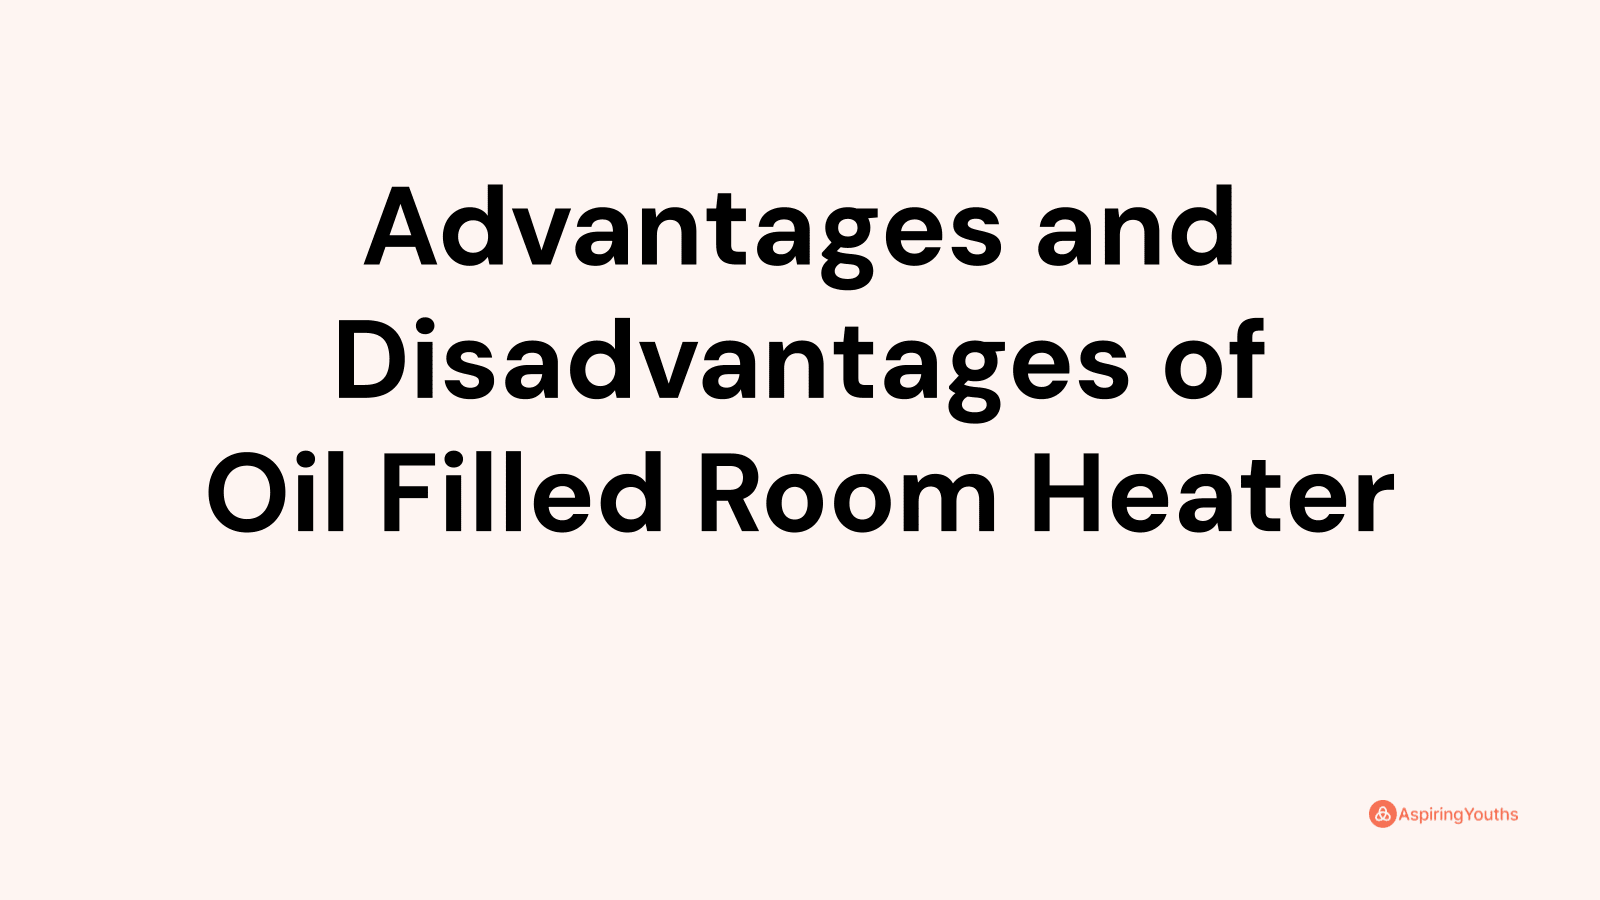 Advantages and disadvantages of Oil Filled Room Heater